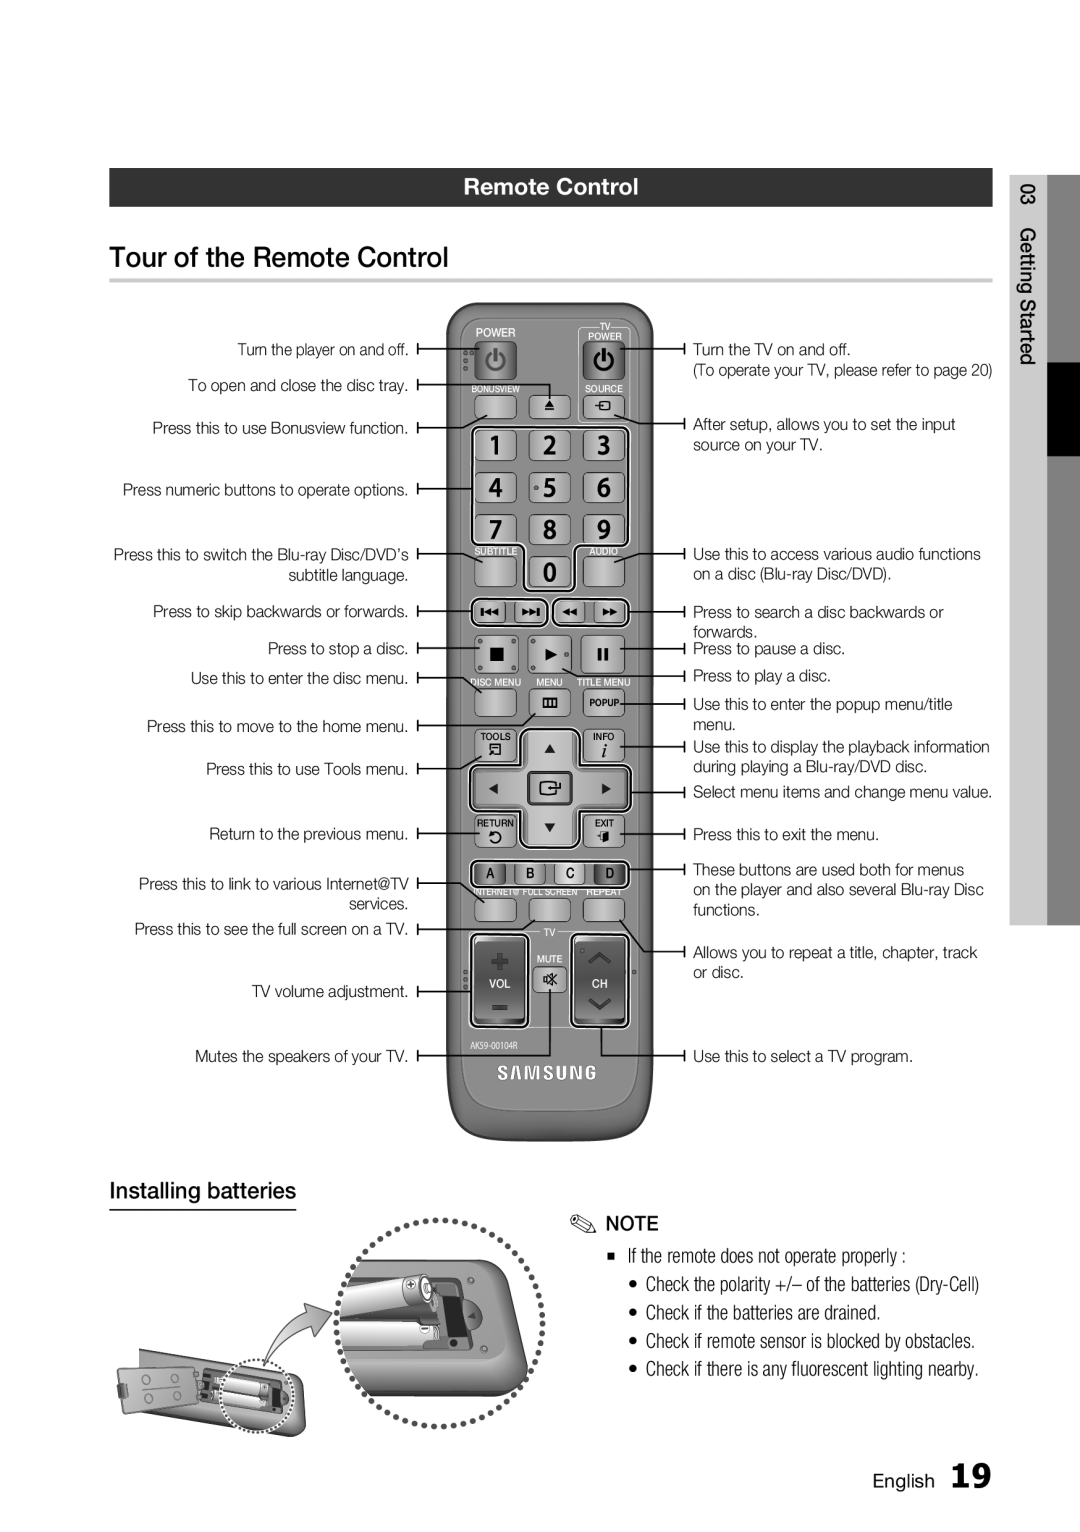 Samsung BD-C6500/XEE, BD-C6500/EDC manual Tour of the Remote Control, Installing batteries, Getting, Started, English 